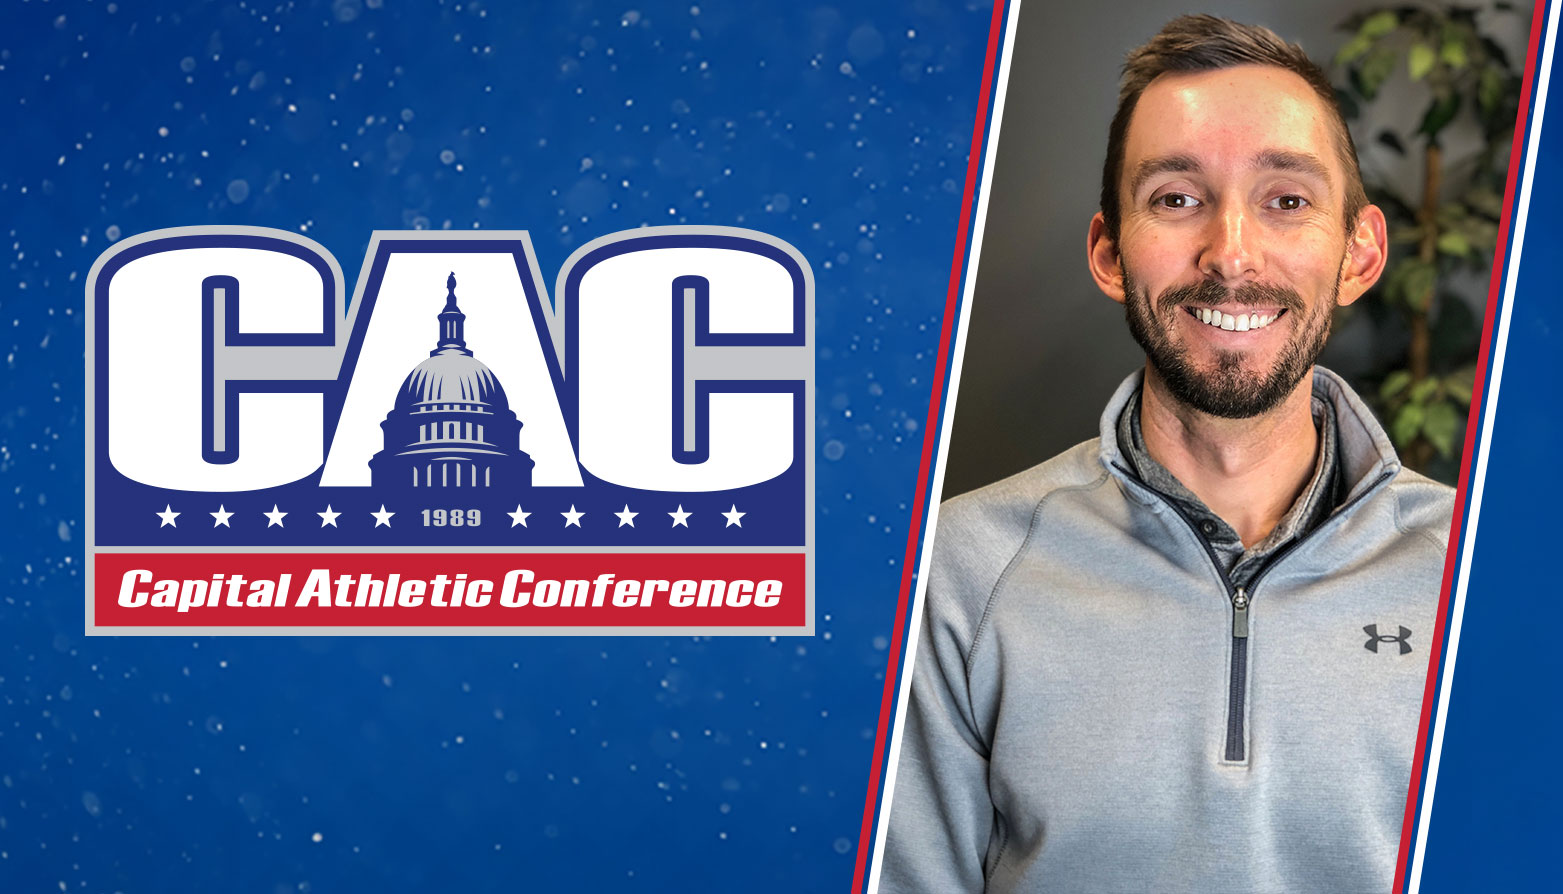 Chris Roekle Named Capital Athletic Conference Associate Commissioner